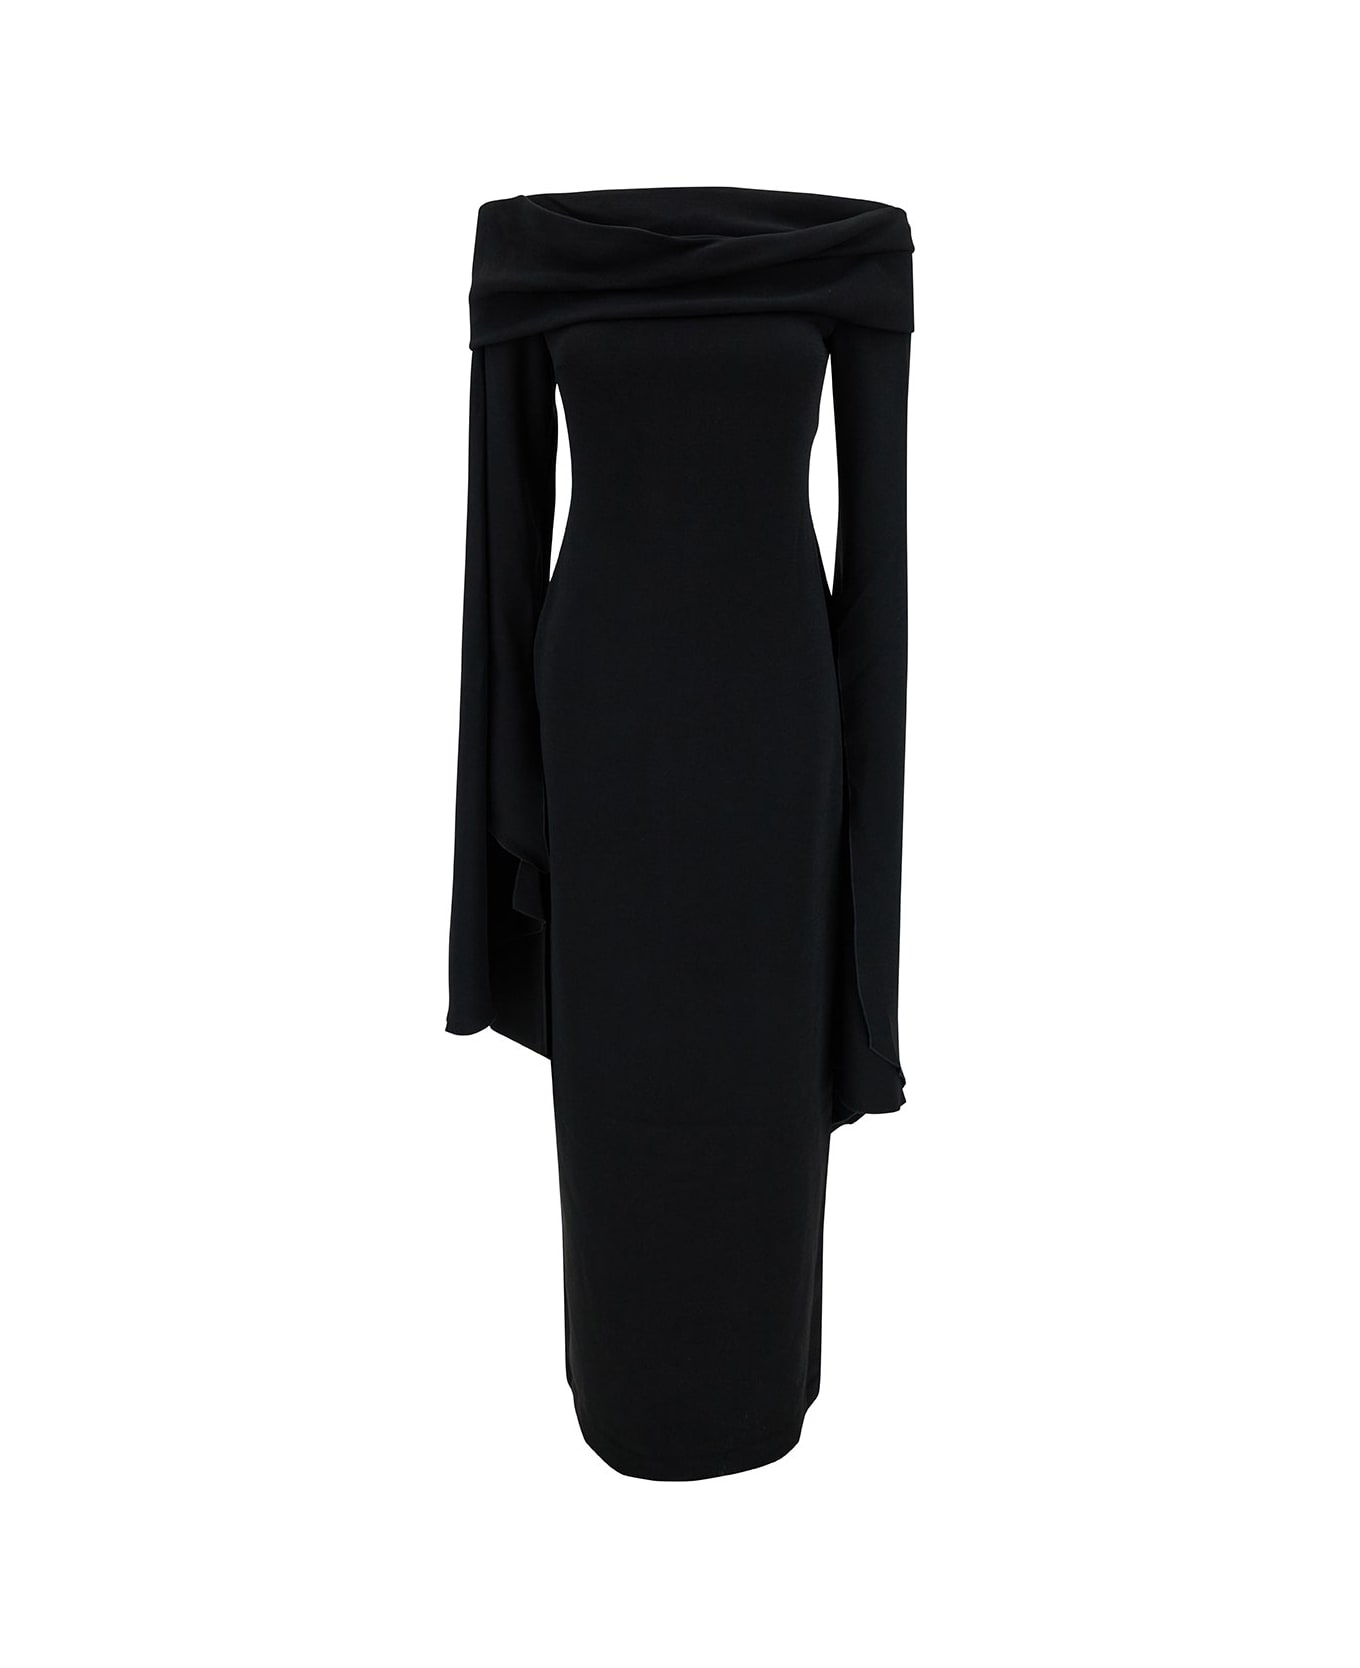 Solace London 'arden' Long Black Dress With Extra Long Dress In Fabric Woman - Black